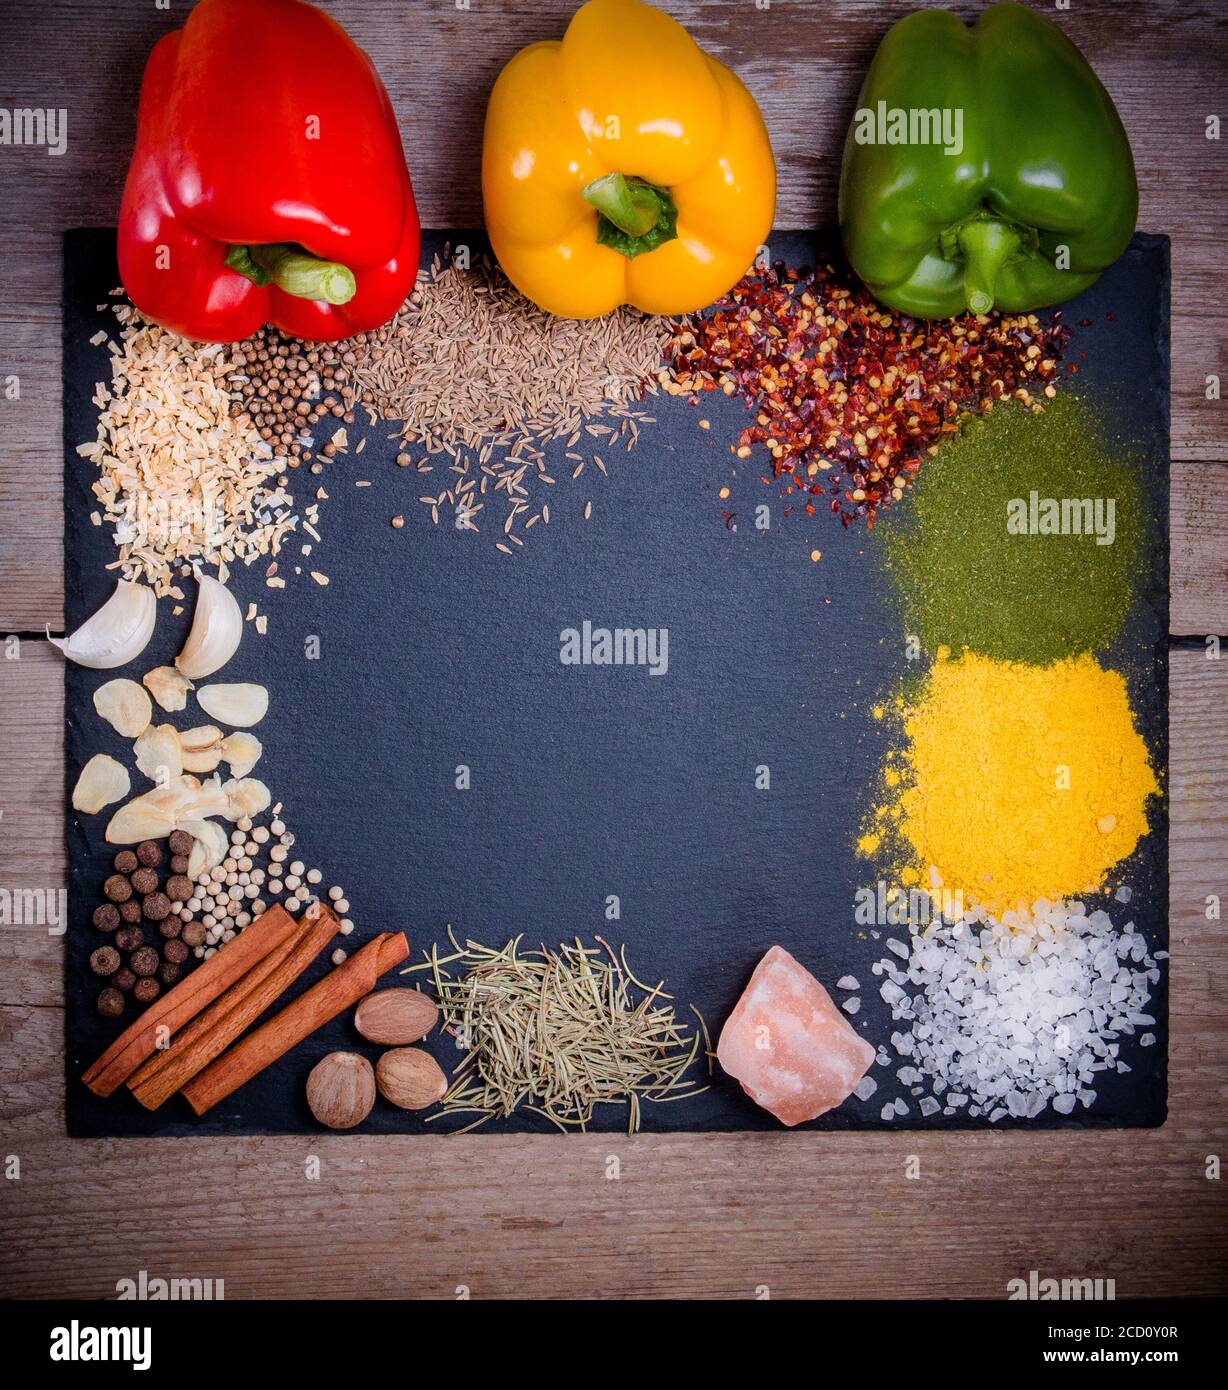 Spices, herbs and fresh pepper on slate tray on an old rustic table. Red, yellow and green fresh peppers. Top view. Rustic style. Fresh ingredients an Stock Photo